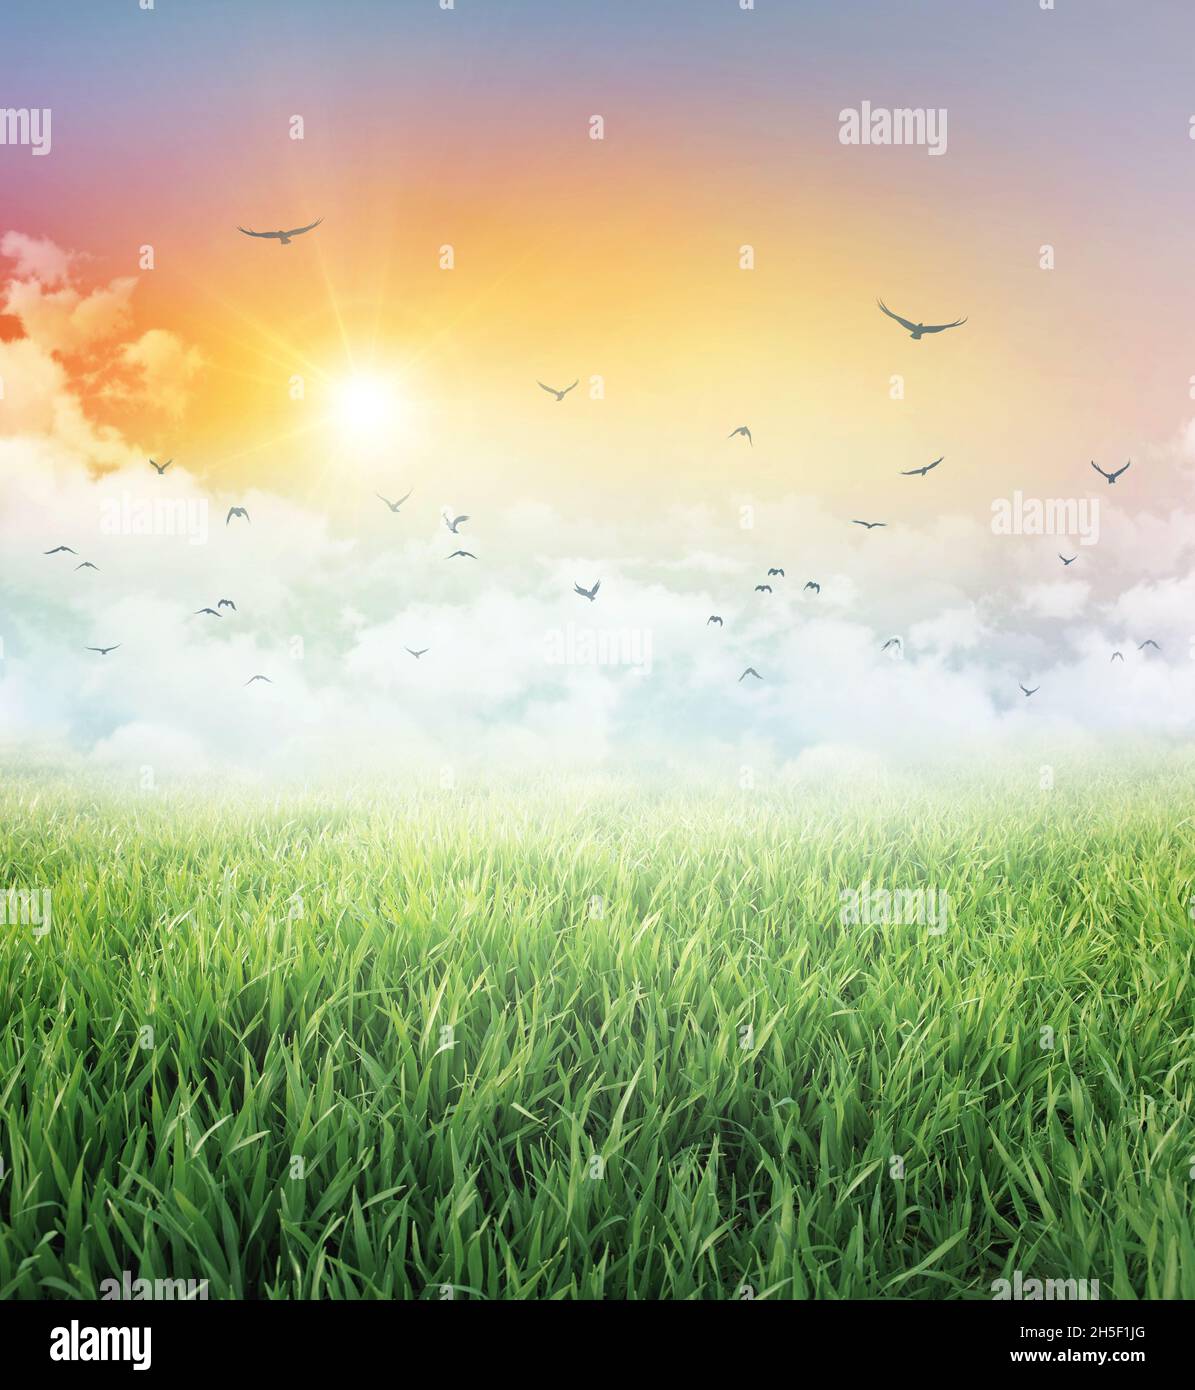 Meadow and green field under a colorful sky, low white clouds, flying birds and the rising sun Stock Photo